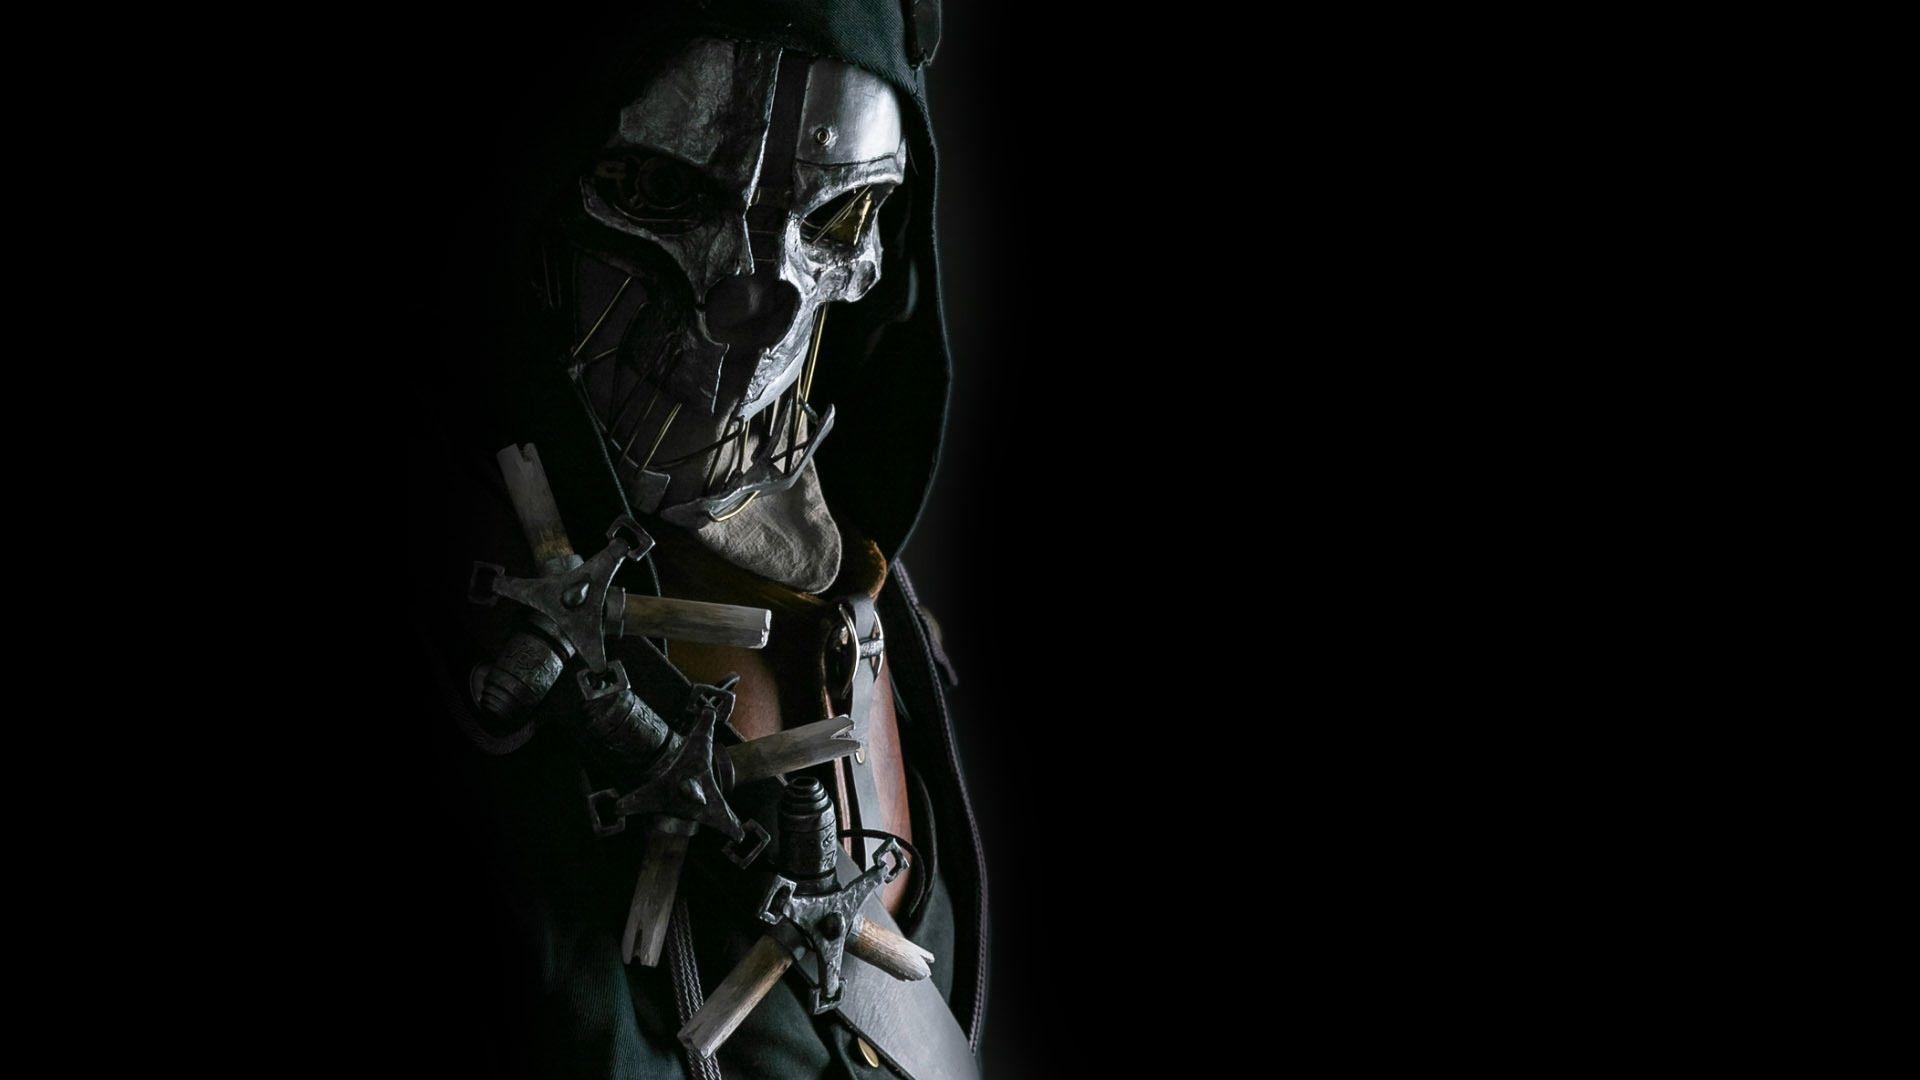 550886 1920x1080 dishonored 2 wallpaper JPG 185 kB - Rare Gallery HD  Wallpapers